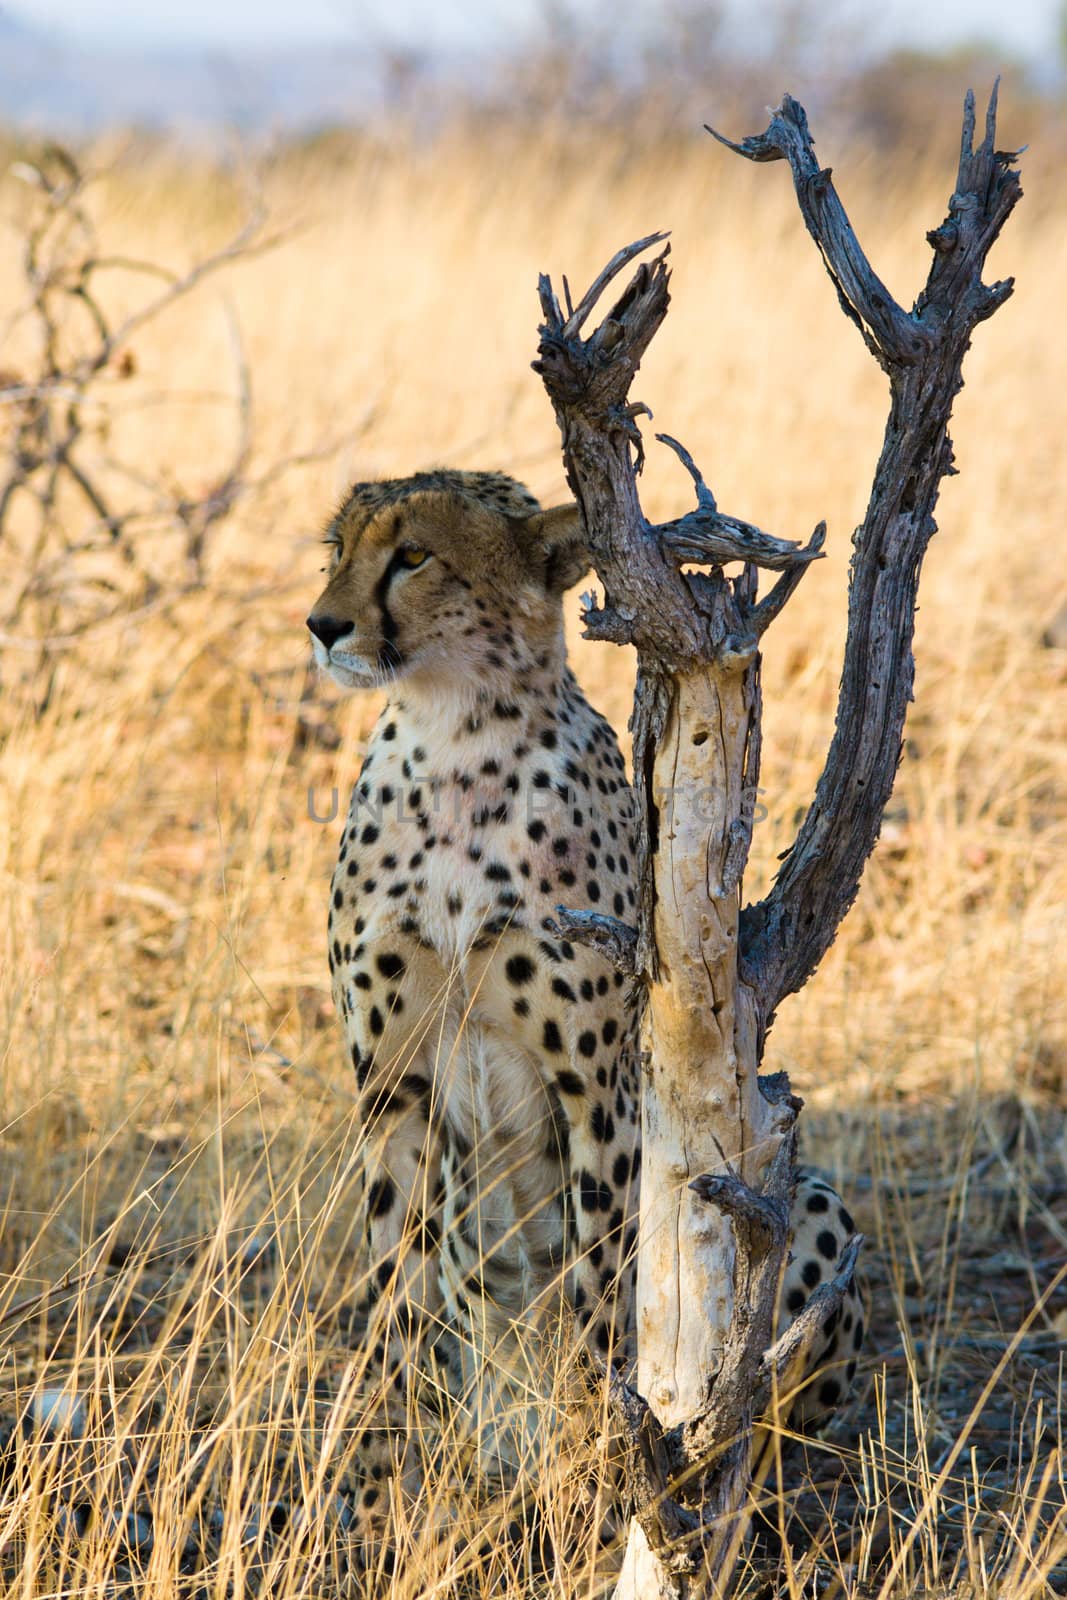 An erect cheetah alertly scans the horizon for its next prey